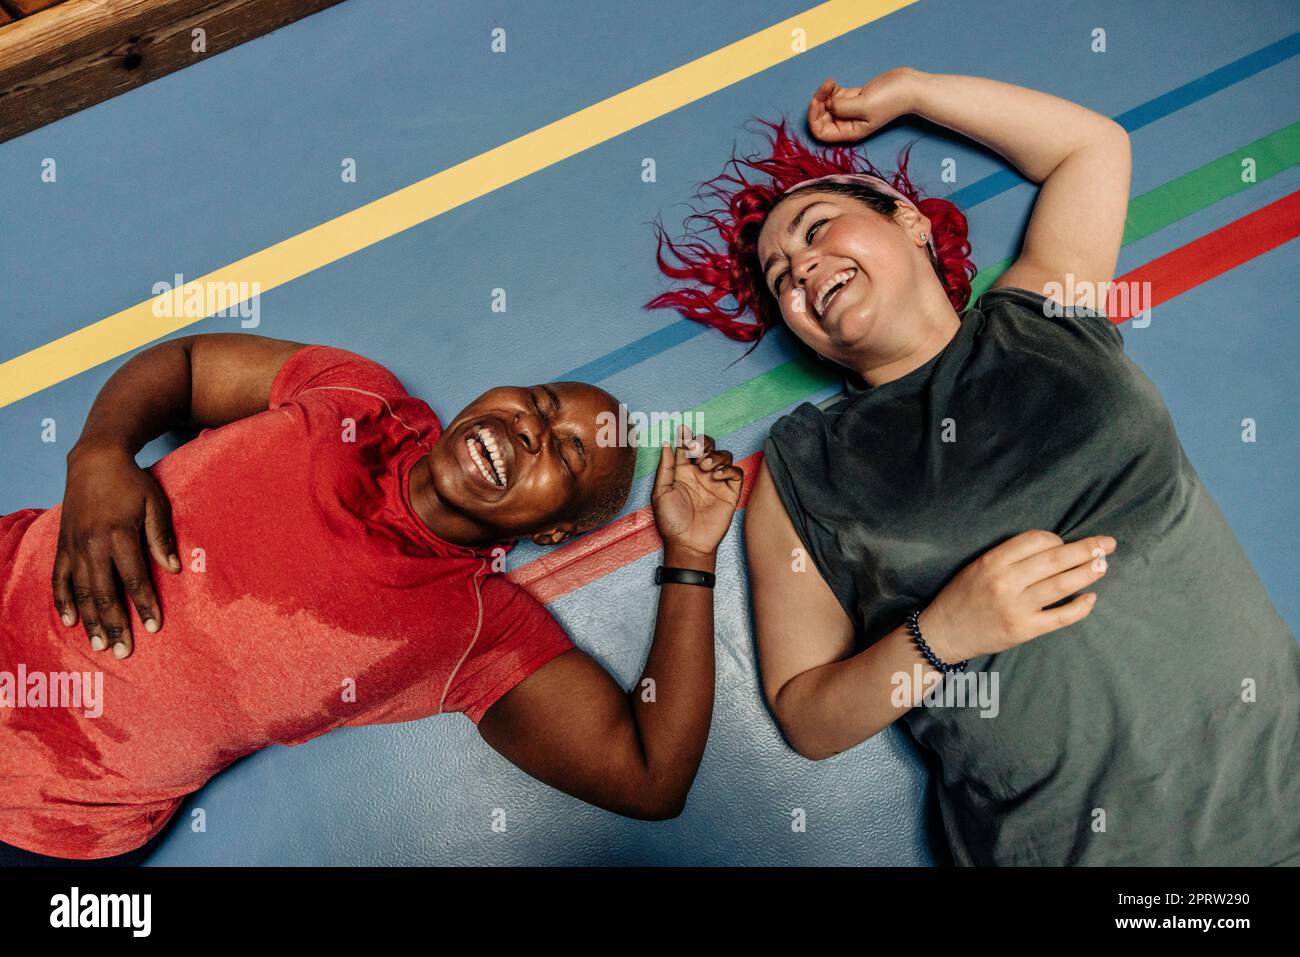 High angle view of female athletes laughing while lying on safety mat at sports court Stock Photo